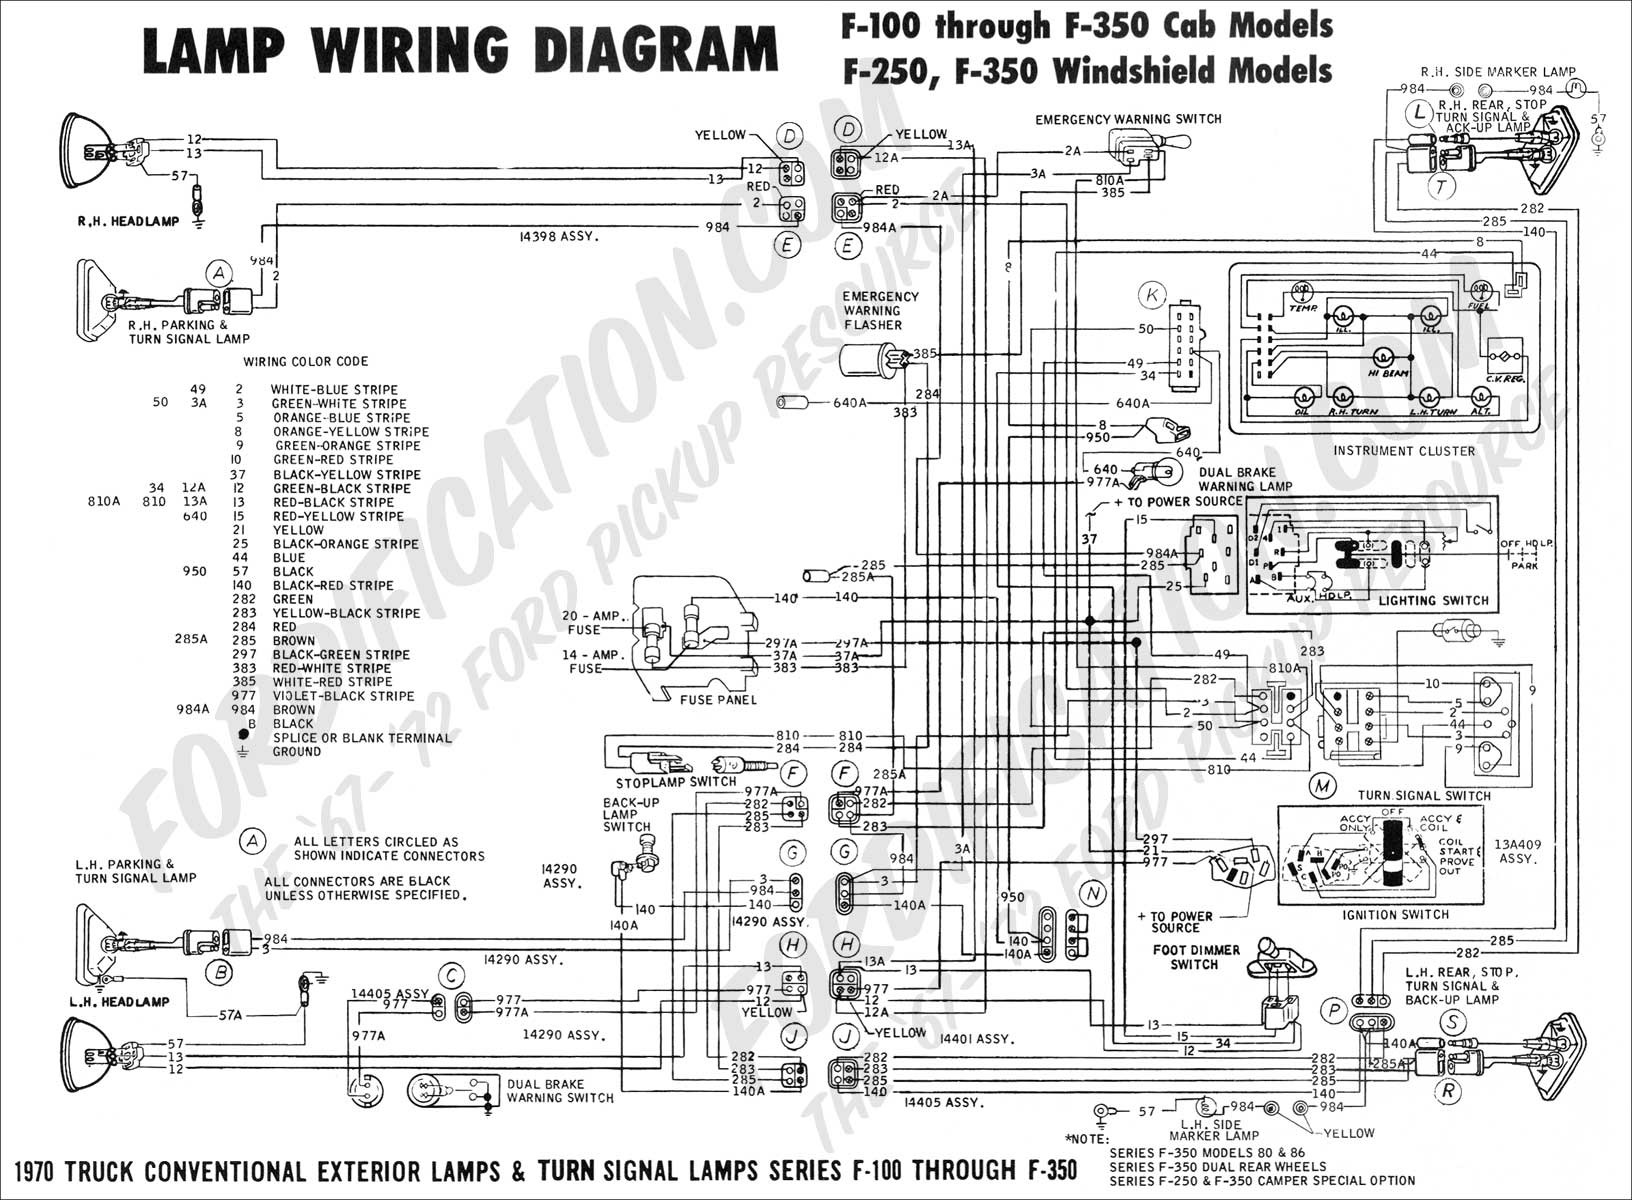 Ford F150 Wiring Diagrams ford F700 Wiring Diagrams Additionally Dodge Under Hood Wiring Of Ford F150 Wiring Diagrams